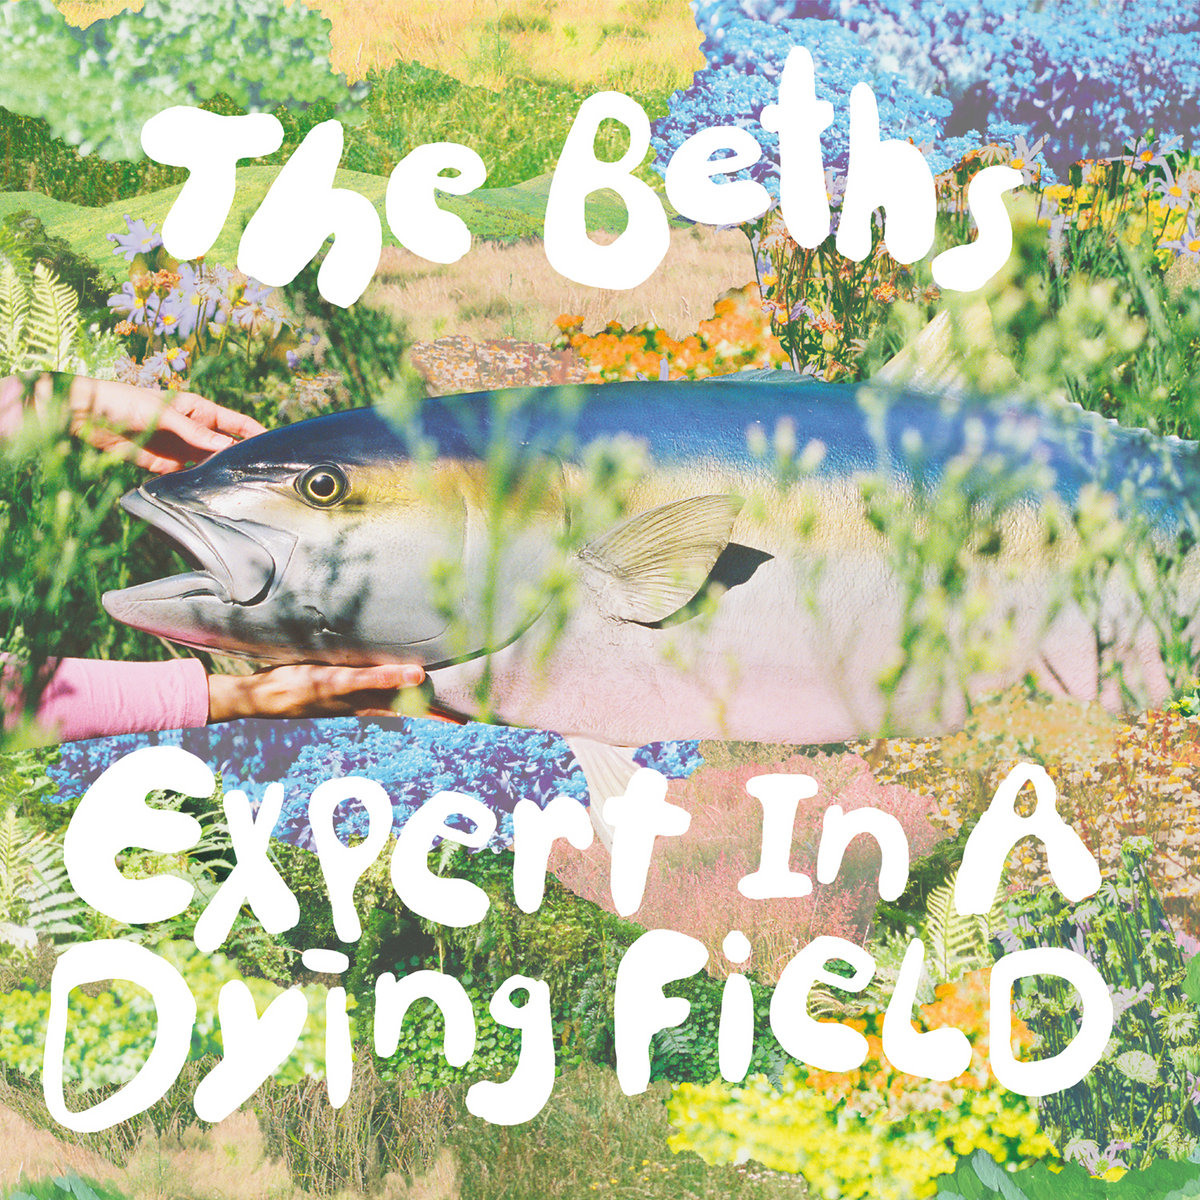 The Beths Expert in a Dying Field album art - hands hlding a giant model fish against a green background